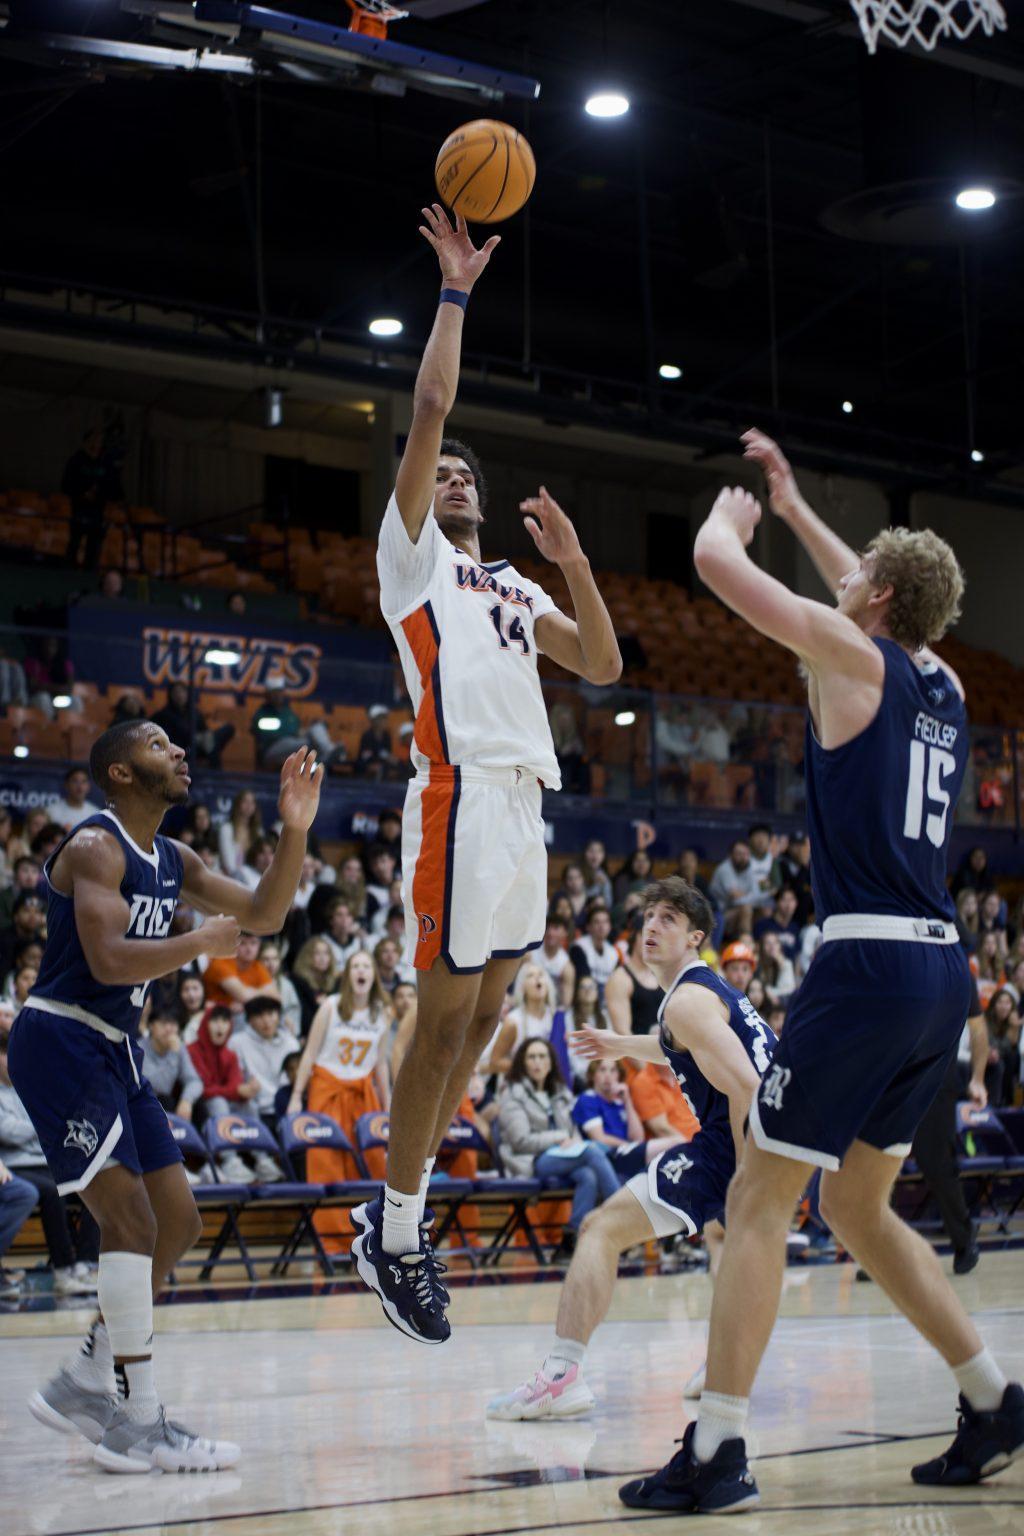 First-year forward Jevon Porter goes up for a layup versus Rice on Nov. 7 at Firestone Fieldhouse. Porter finished with 16 points in his collegiate debut.